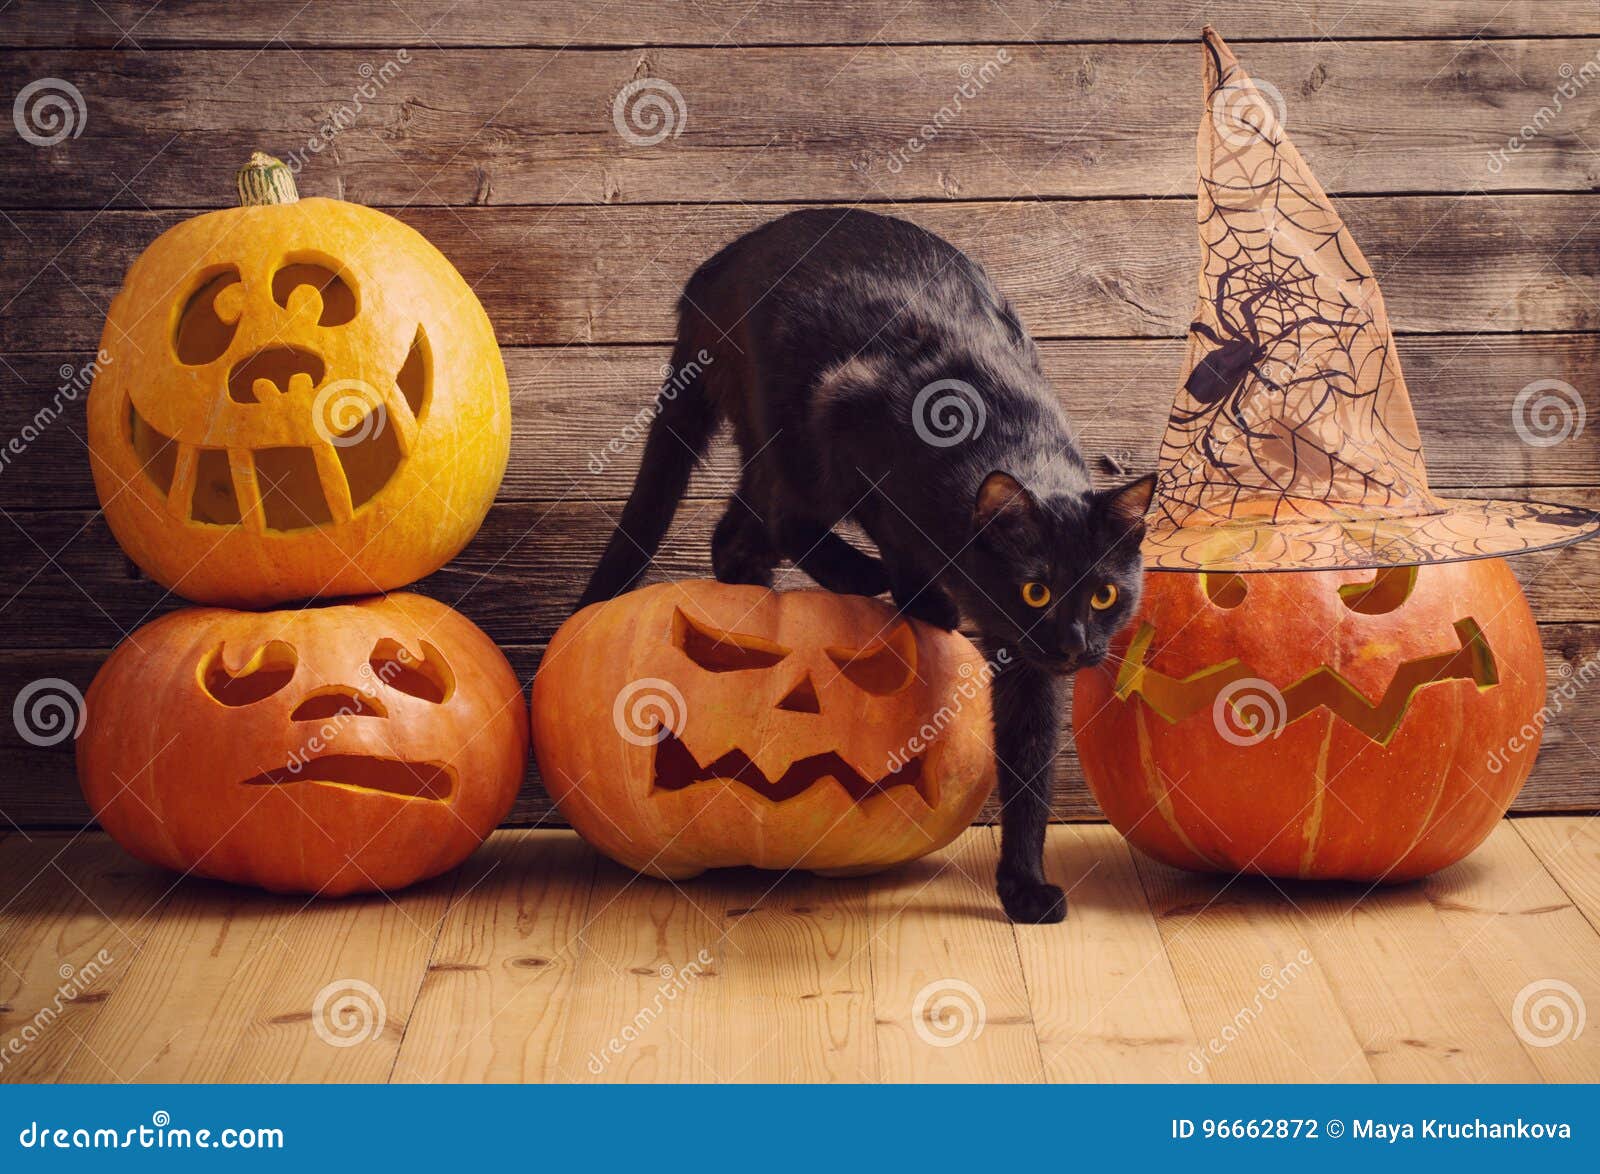 10 703 Cat Halloween Photos Free Royalty Free Stock Photos From Dreamstime